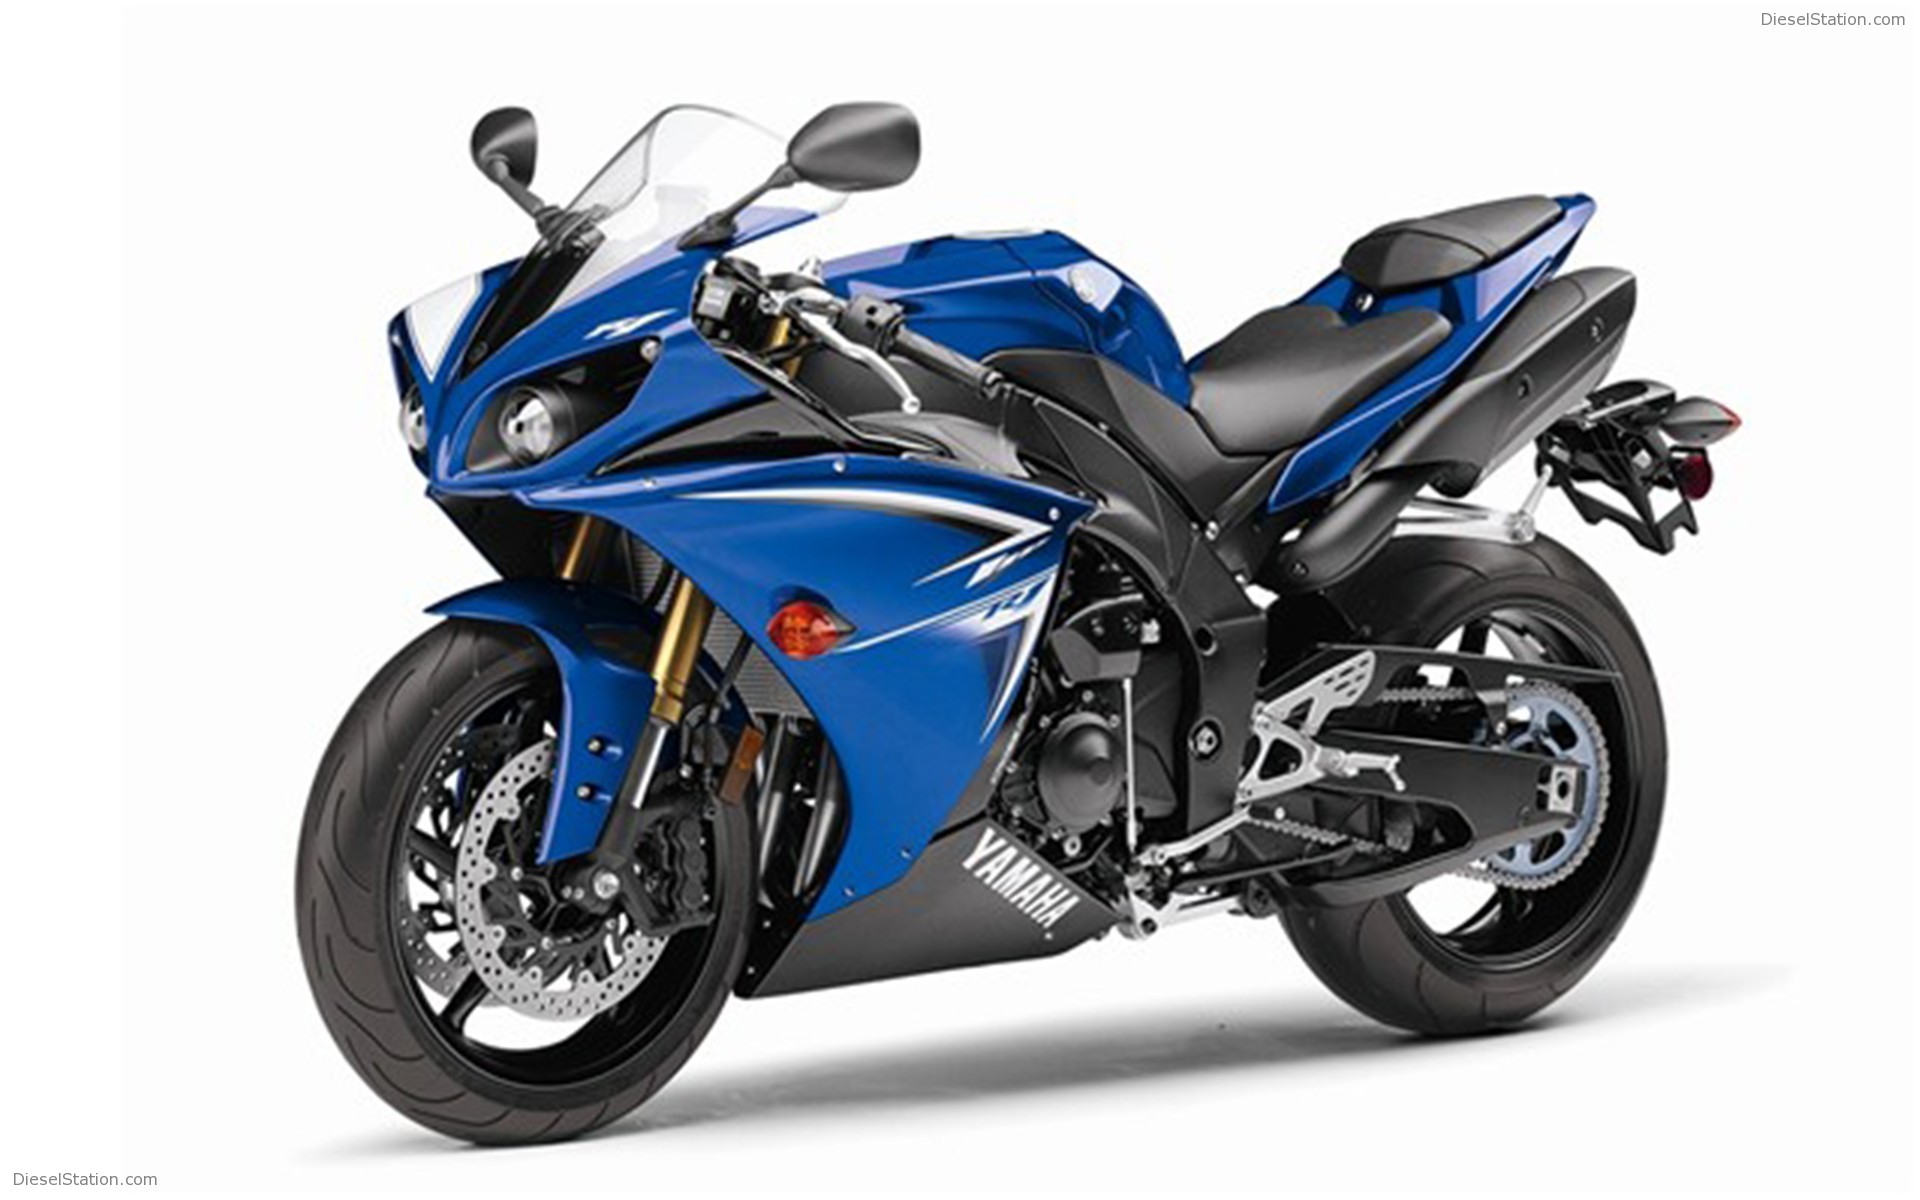 Yamaha Yzf R1 Widescreen Exotic Bike Picture Of Diesel